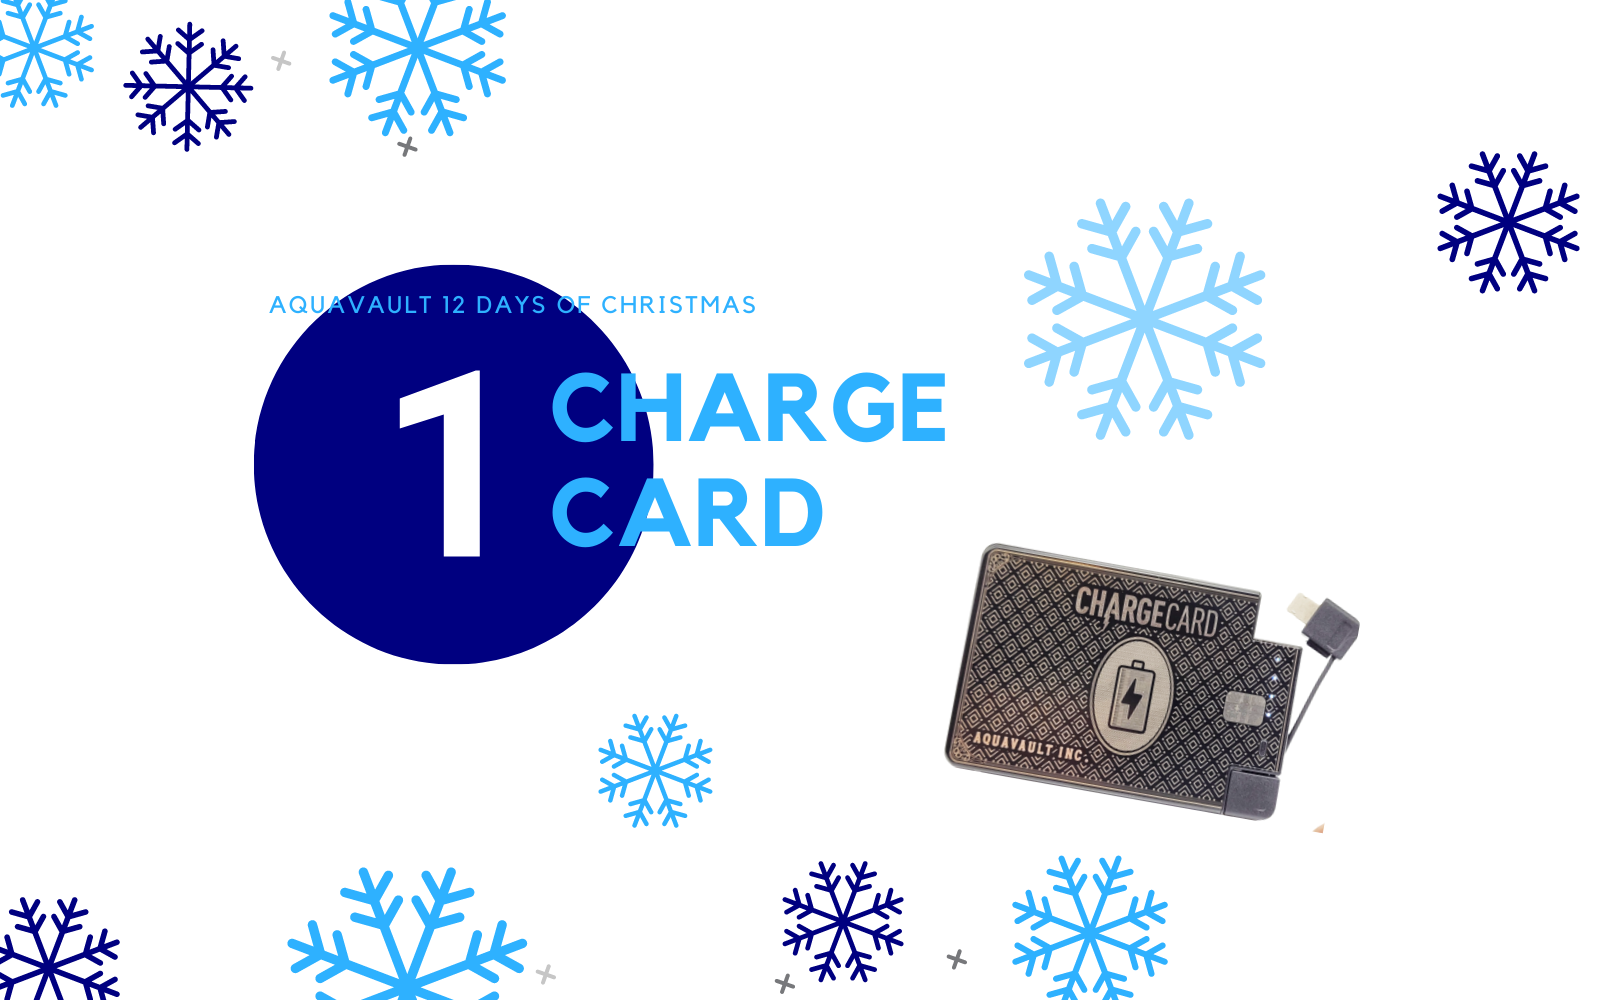 AquaVault 12 Days of Christmas - Day 1: ChargeCard